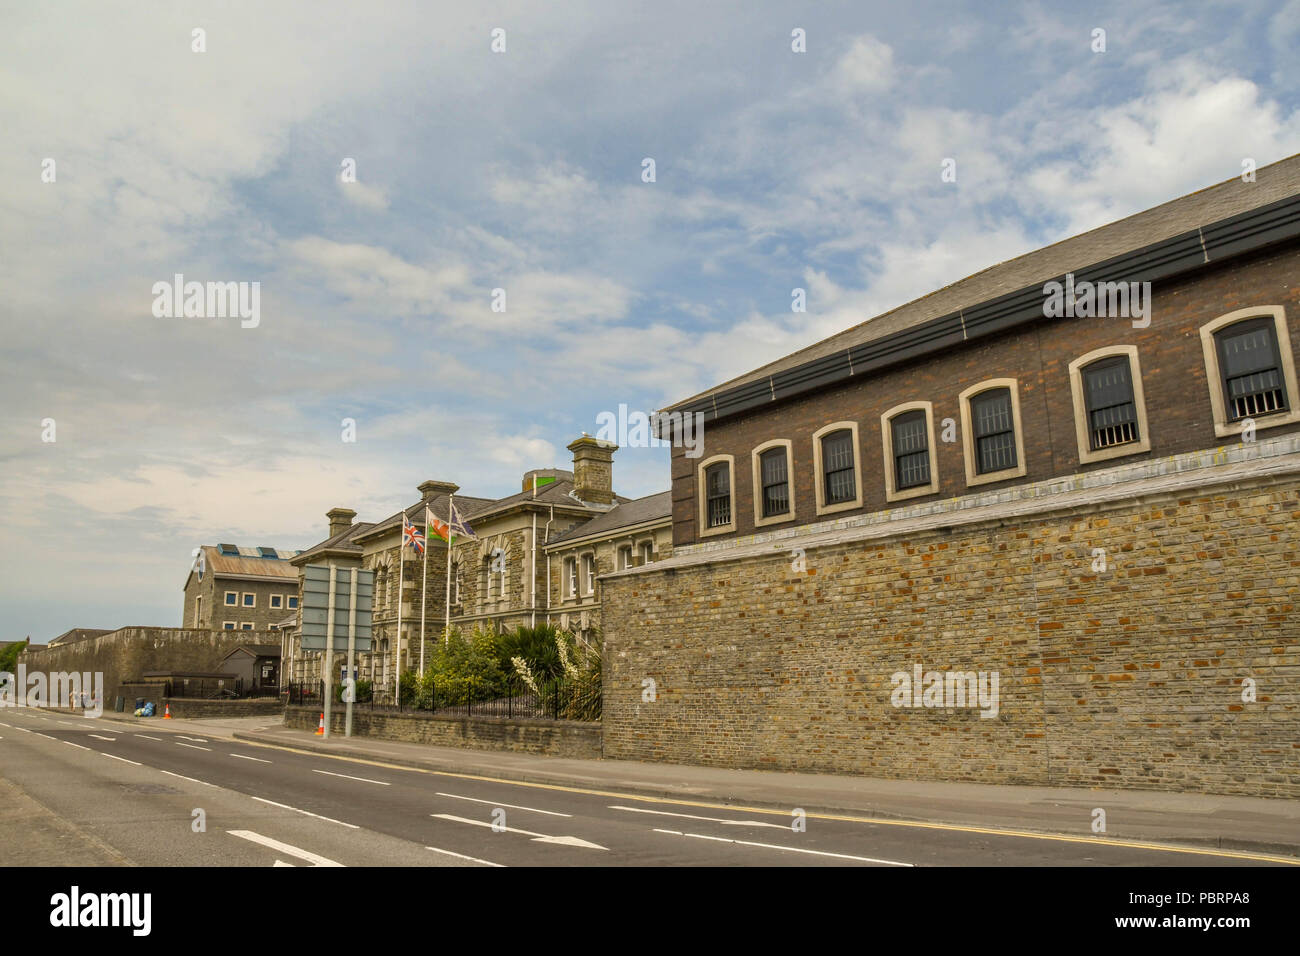 Wide angle view of the high wall and building of HM Prison Swansea Stock Photo